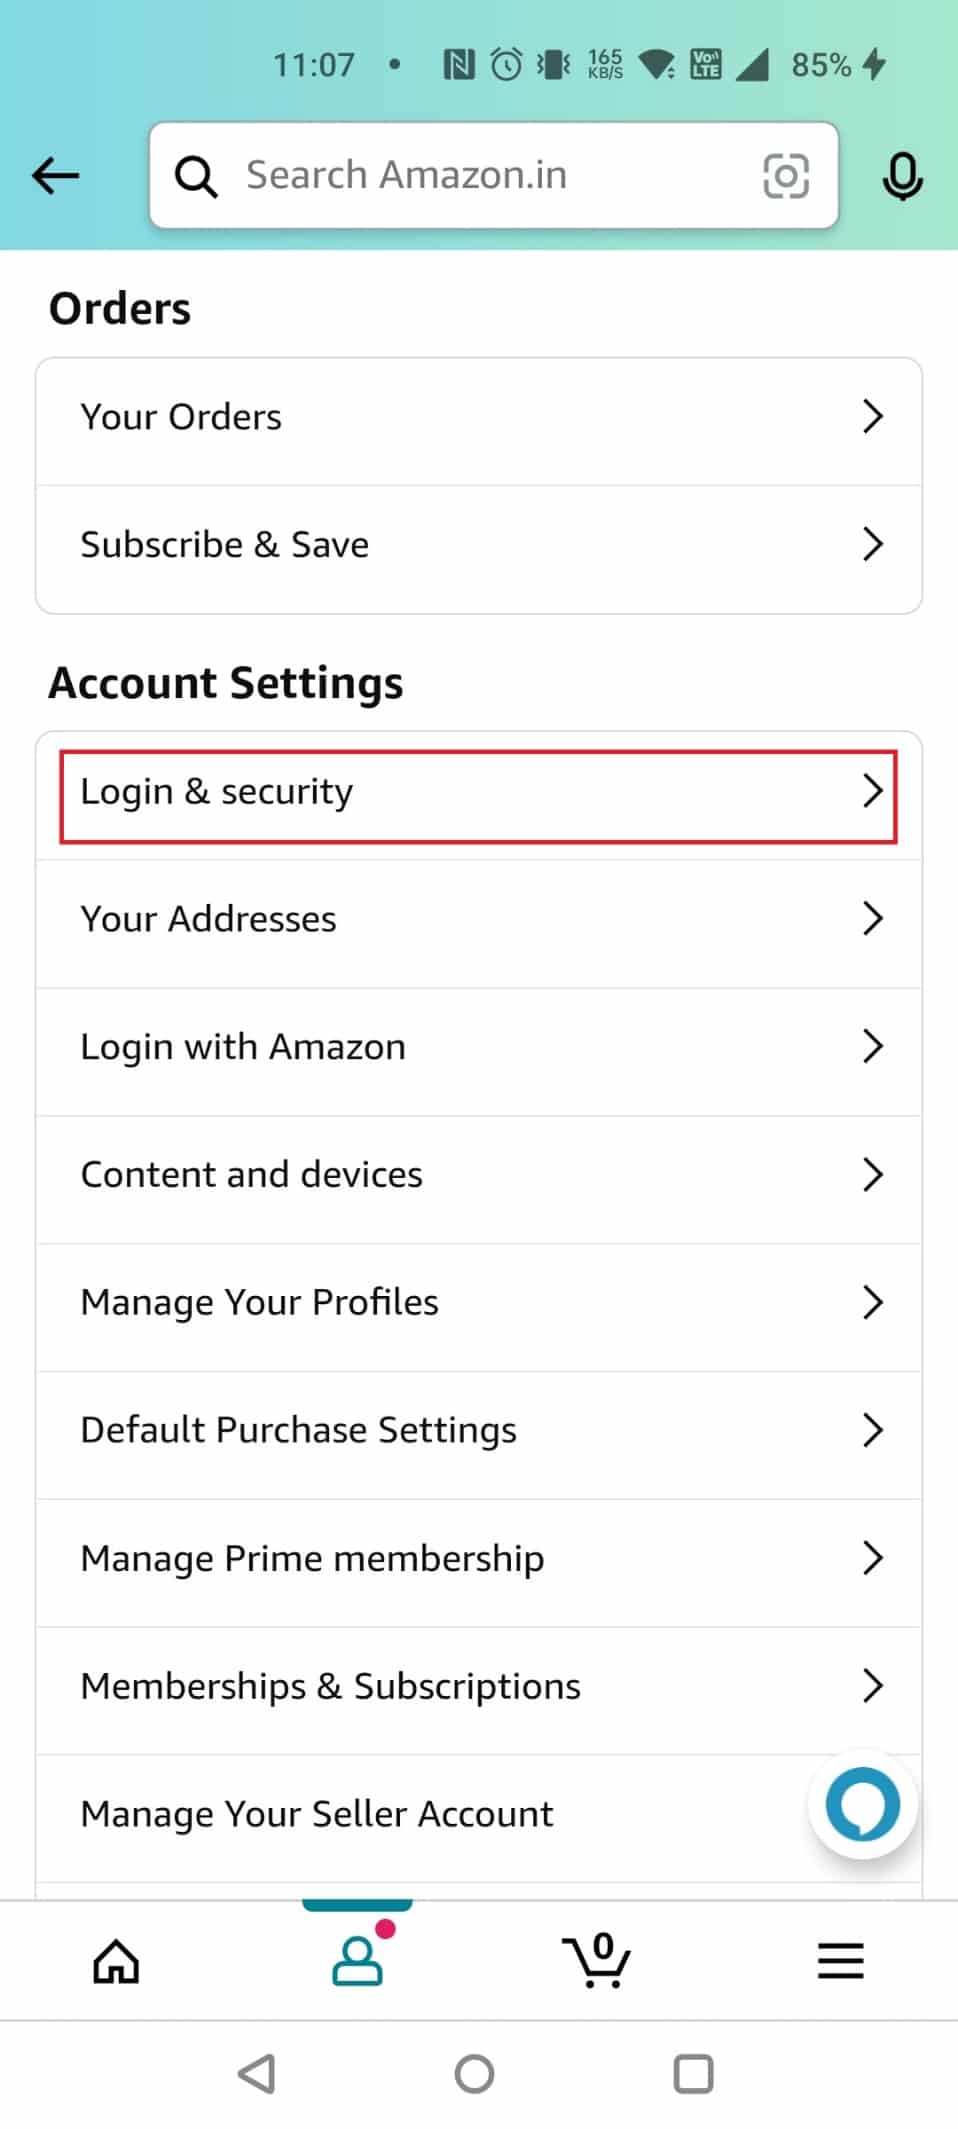 Select Login and security